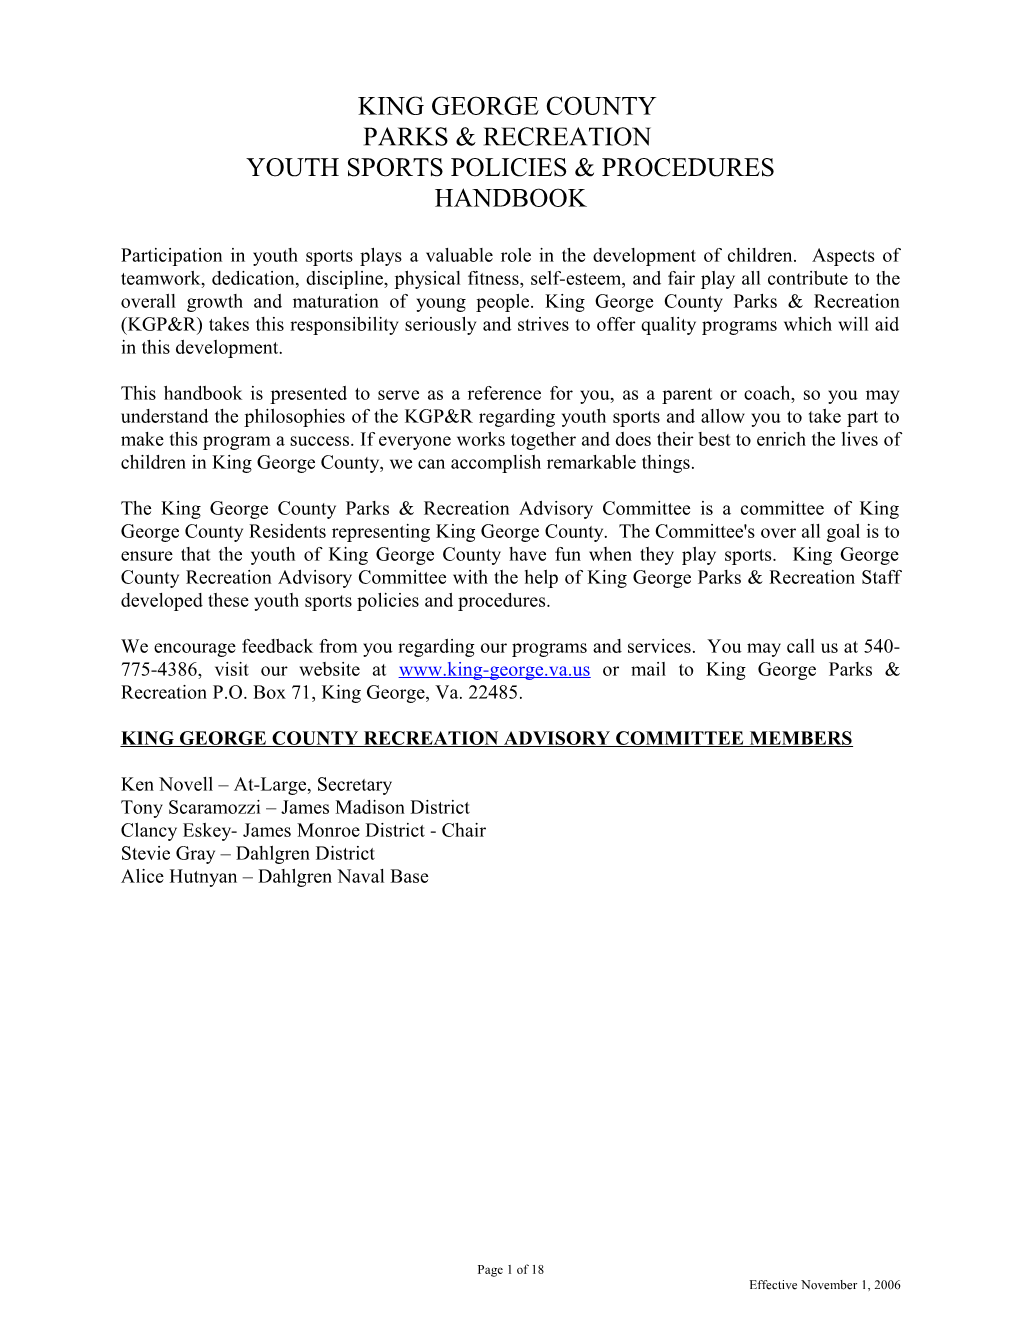 Youth Sports Policies & Procedures